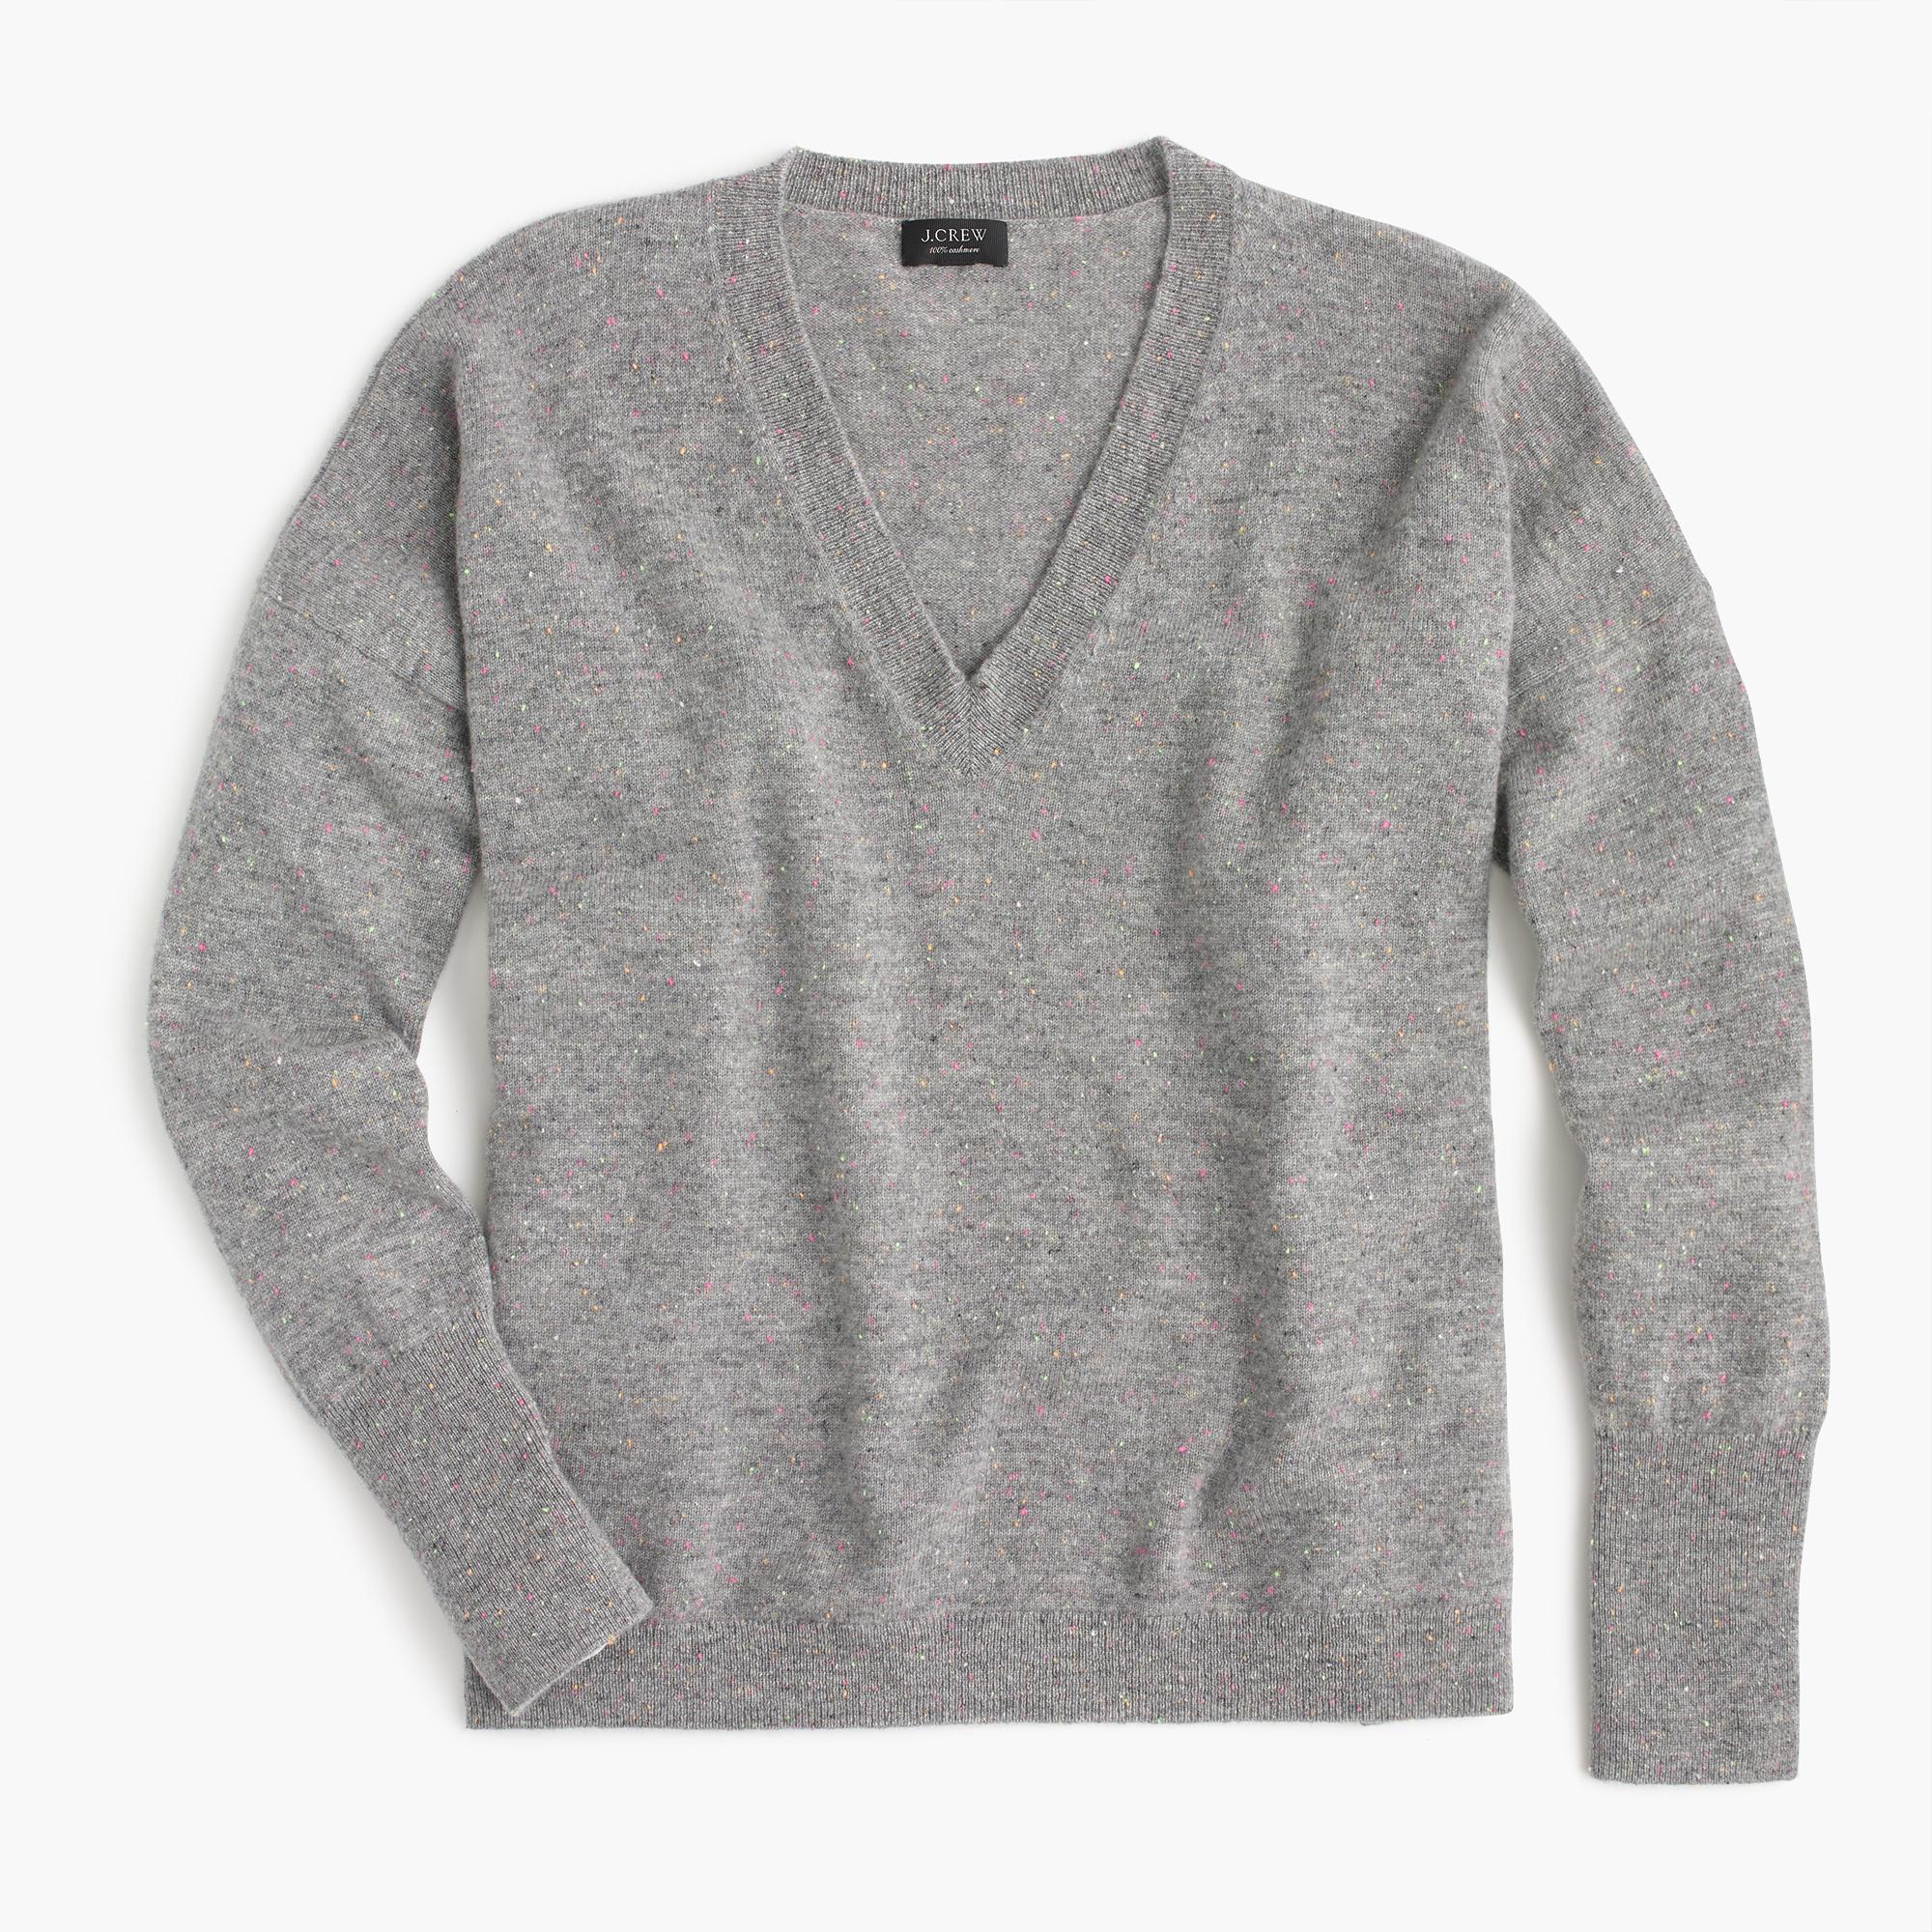 J.Crew V-neck Boyfriend Sweater In Donegal Everyday Cashmere in Gray - Lyst